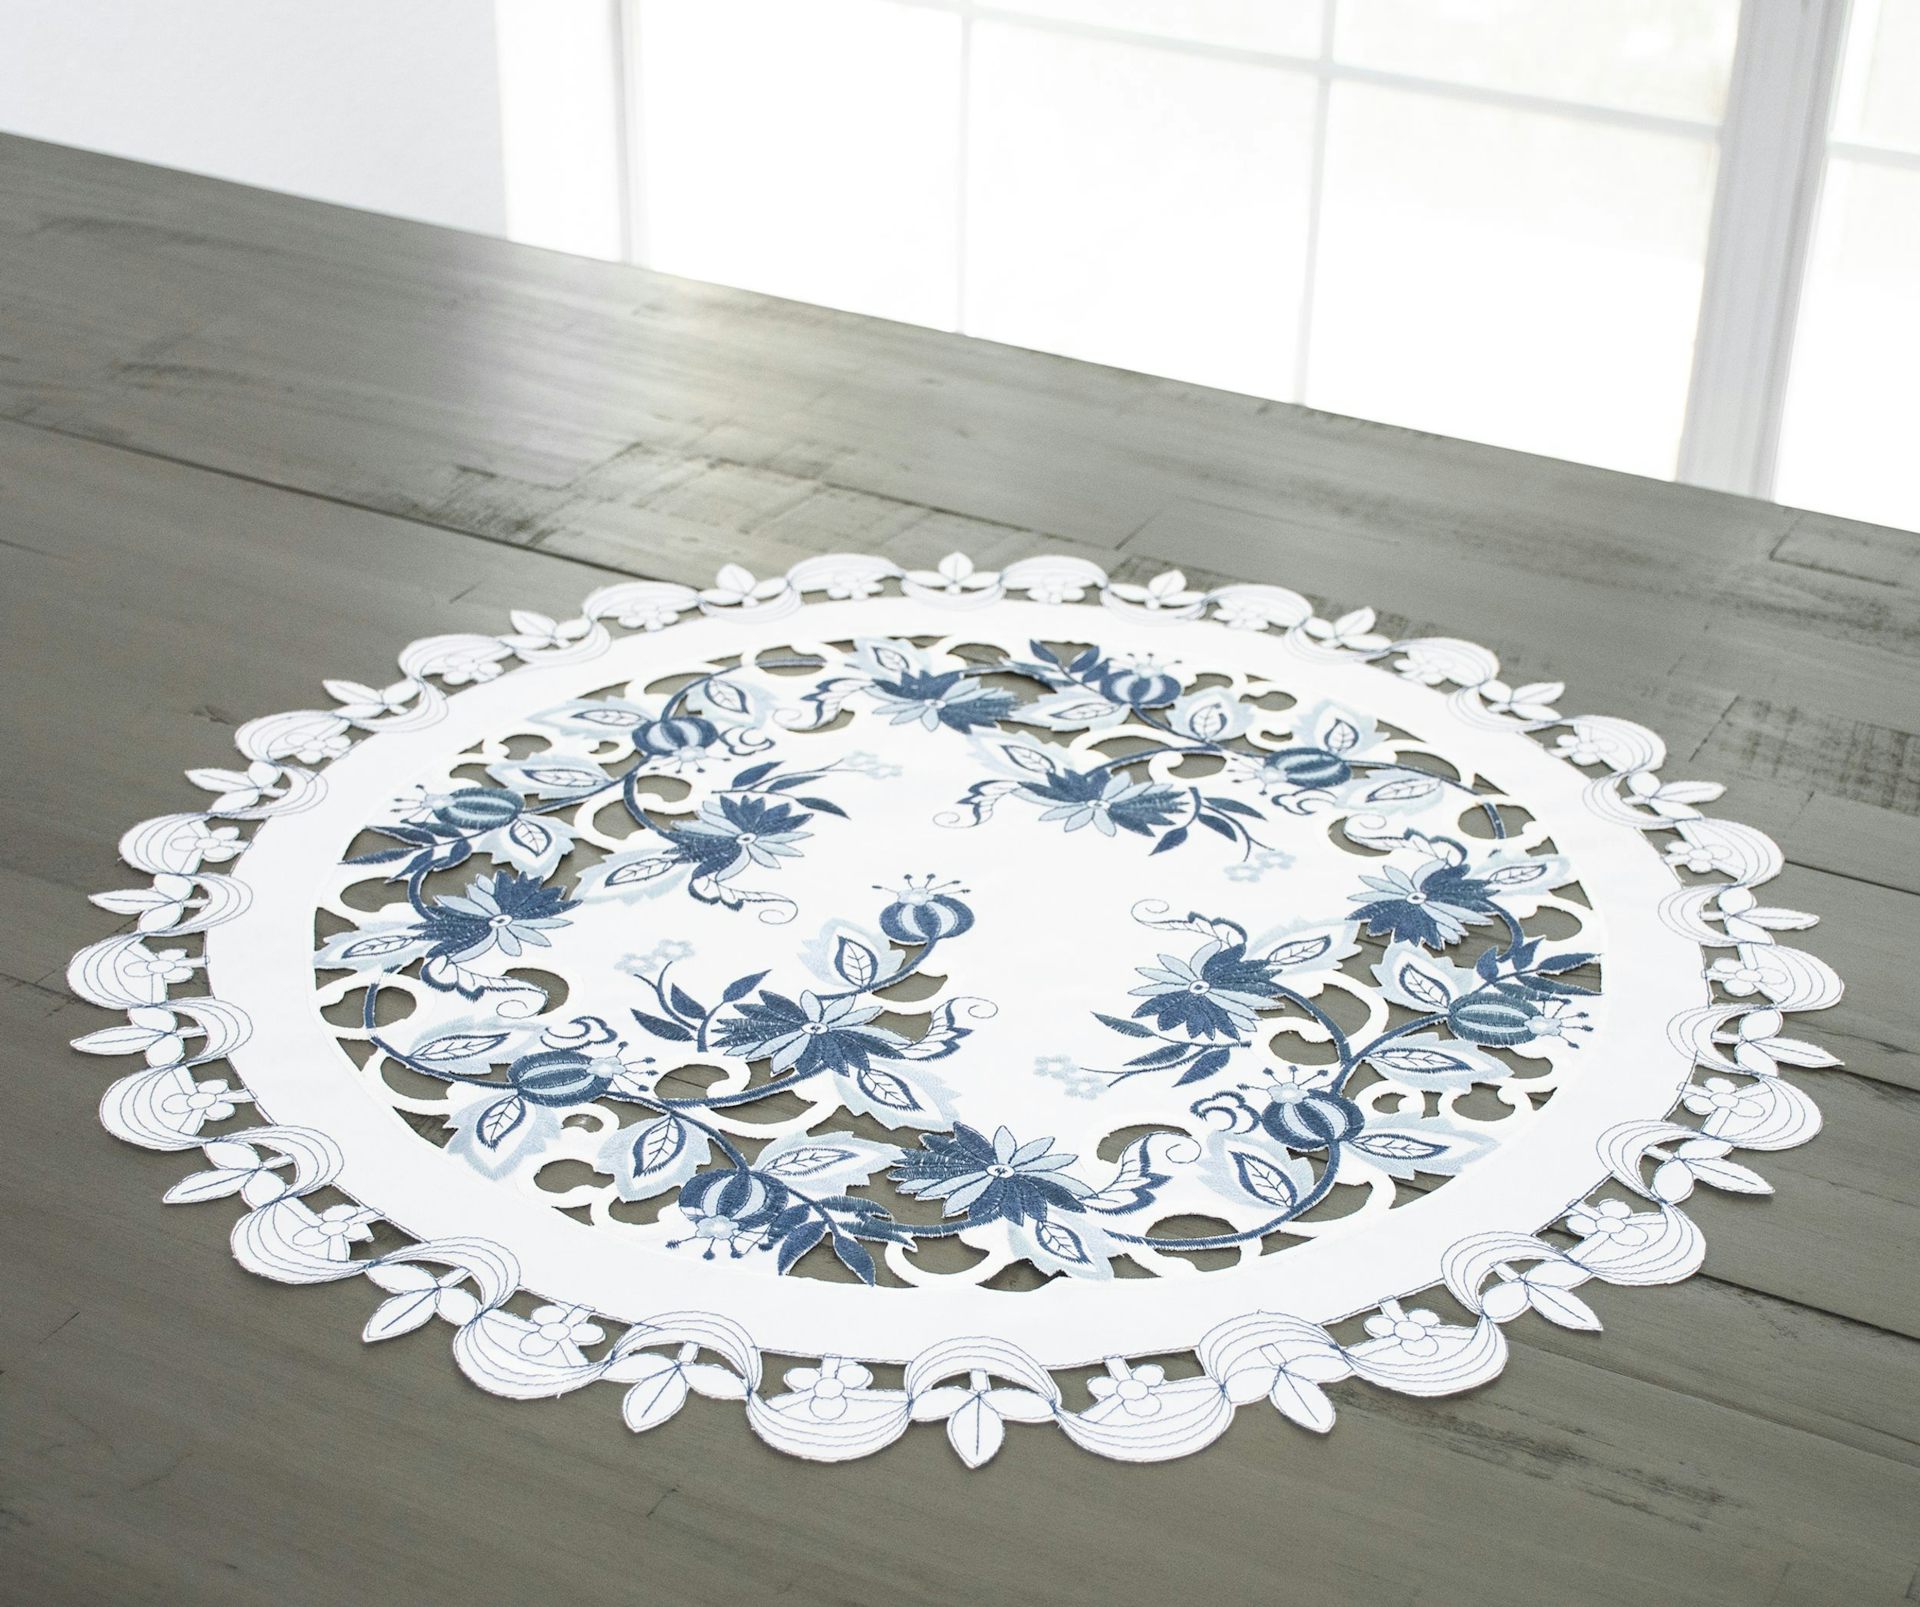 Delft Blue Onion Flower Ivory Table Topper (23",33" RD,SQ)